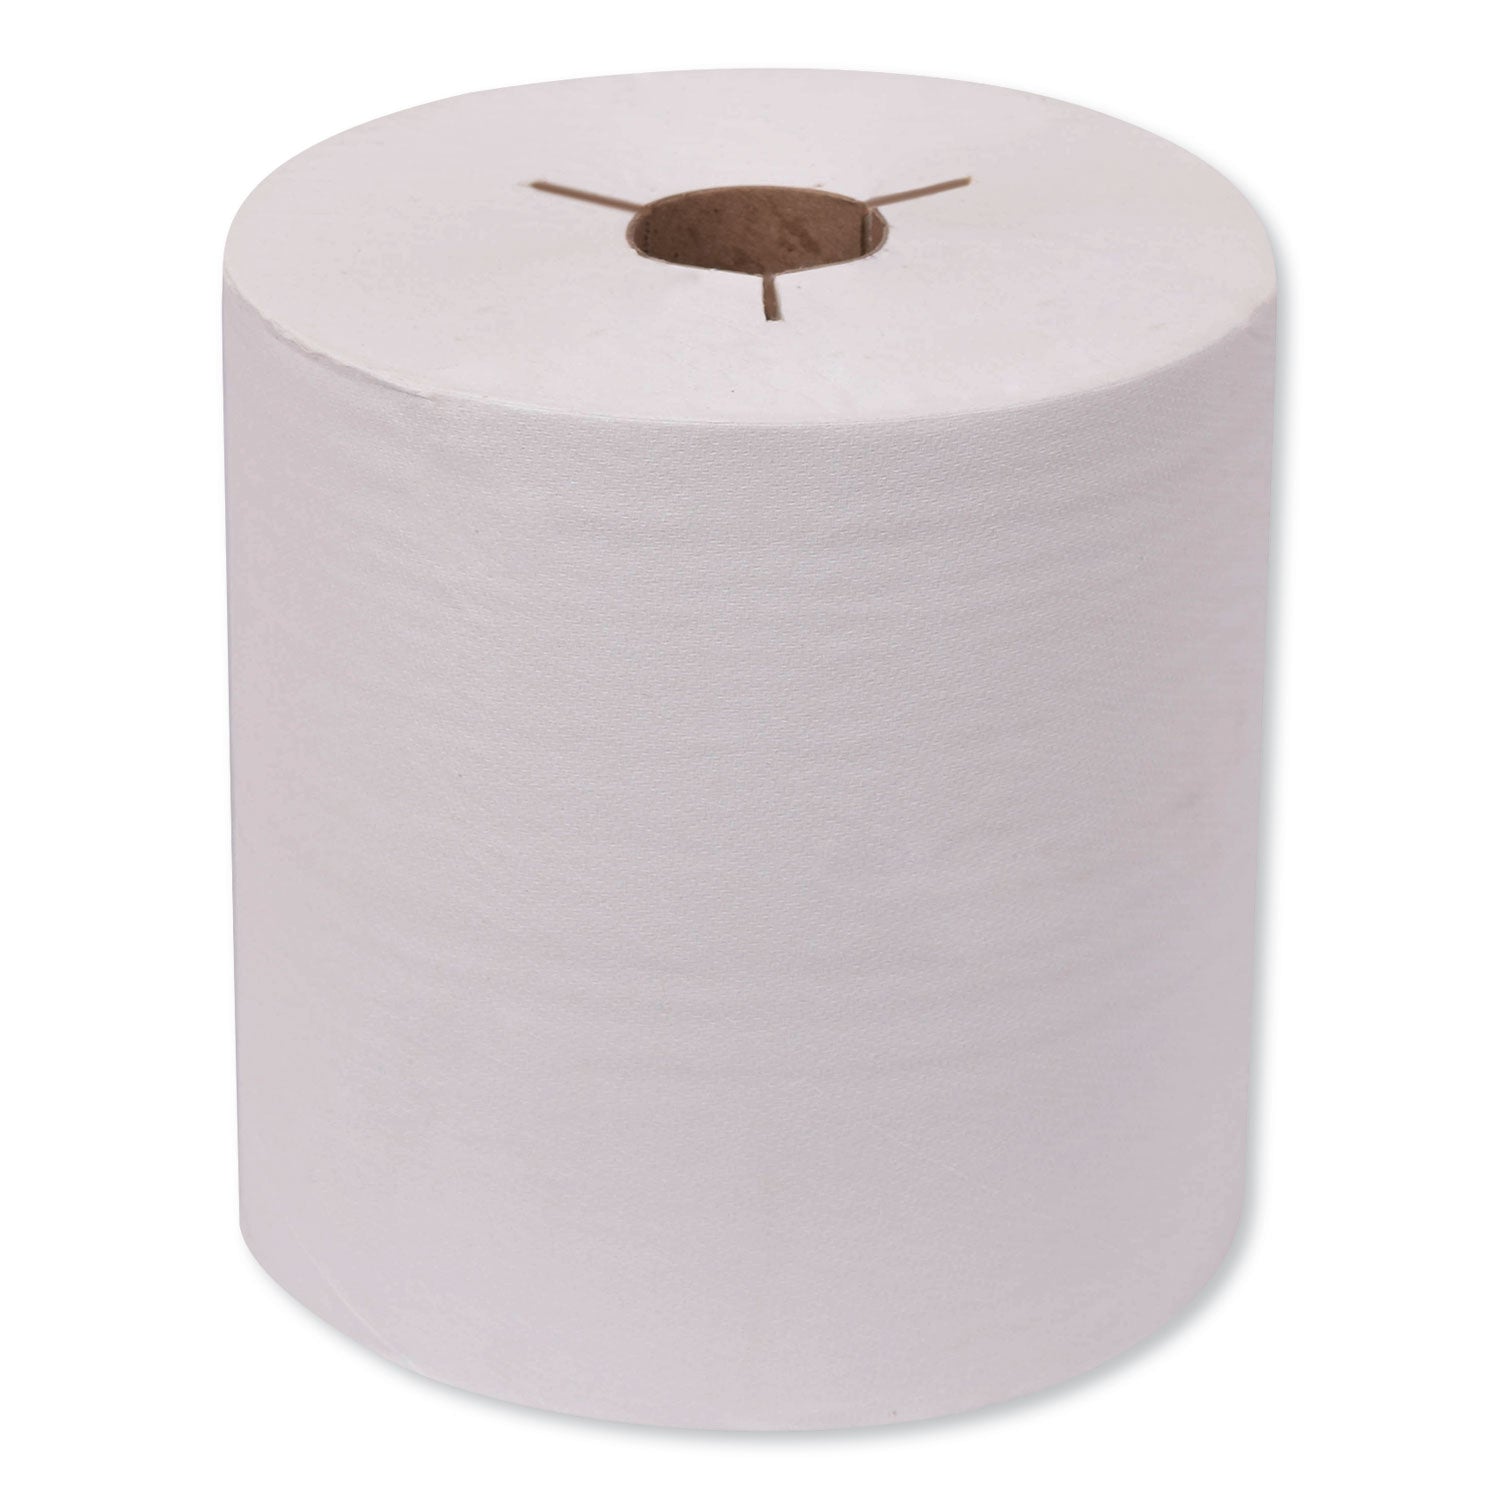 universal-hand-towel-roll-notched-1-ply-8-x-800-ft-natural-white-6-rolls-carton_trk8031400 - 1